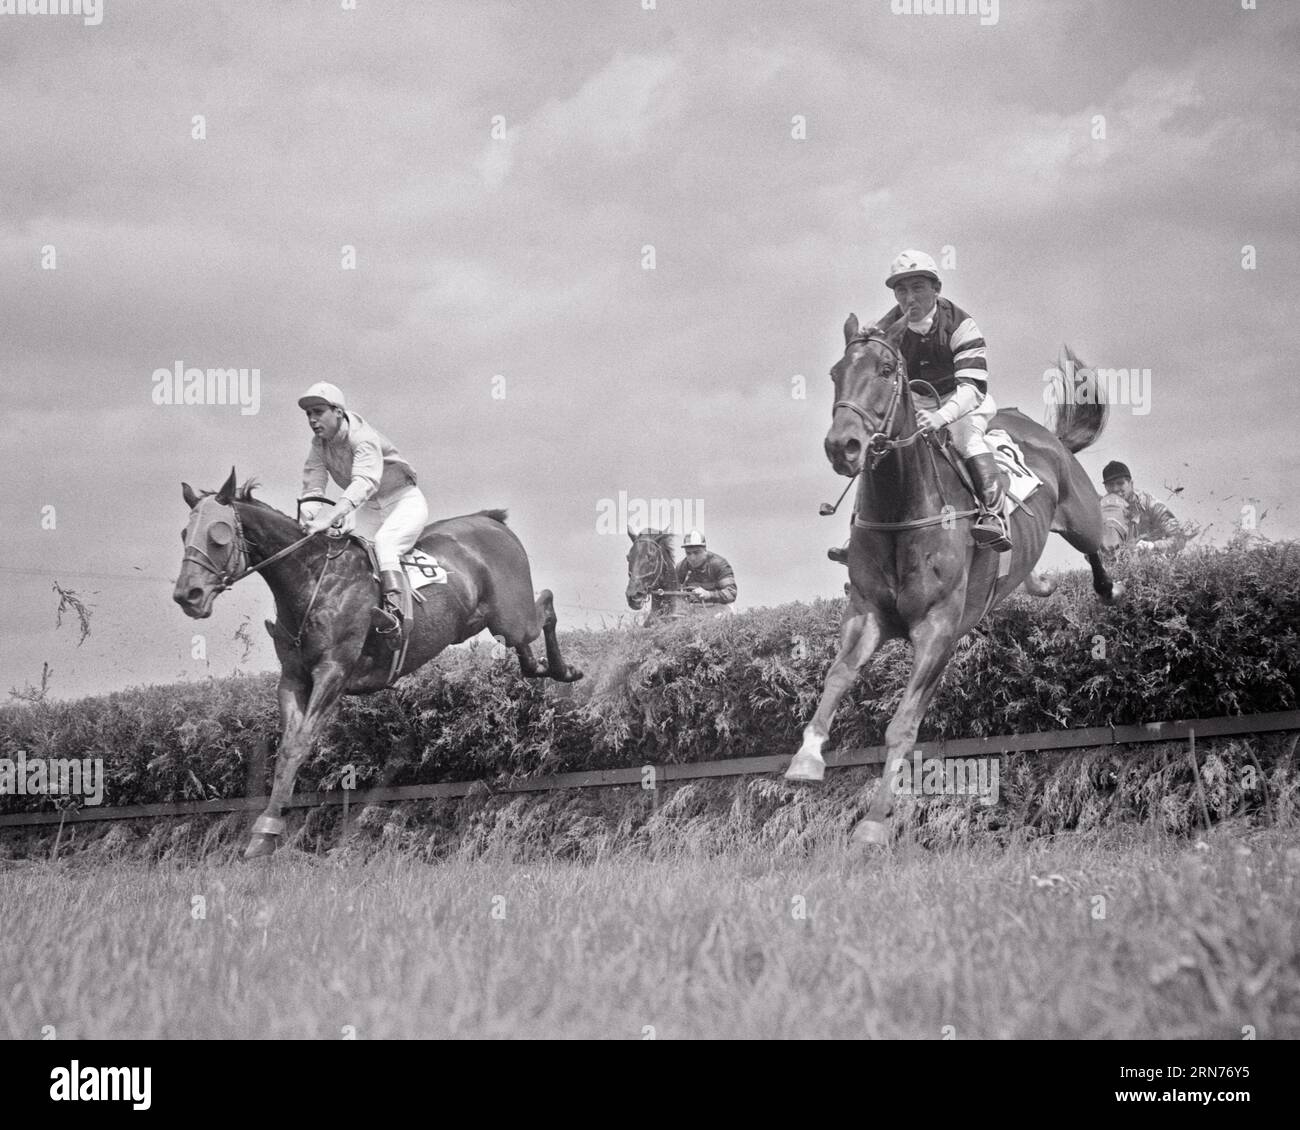 1960s STEEPLECHASE HORSE RACE WITH HORSES AND JOCKEYS JUMPING OVER A HEDGE HAZARD - h1965 HAR001 HARS STRATEGY COURAGE AND EXCITEMENT KNOWLEDGE LOW ANGLE POWERFUL RECREATION DIRECTION PRIDE OPPORTUNITY OCCUPATIONS UNIFORMS PROFESSIONAL SPORTS CONCEPTUAL JOCKEYS STYLISH STEEPLECHASE COLORS MAMMAL PRECISION BLACK AND WHITE HAR001 OLD FASHIONED Stock Photo